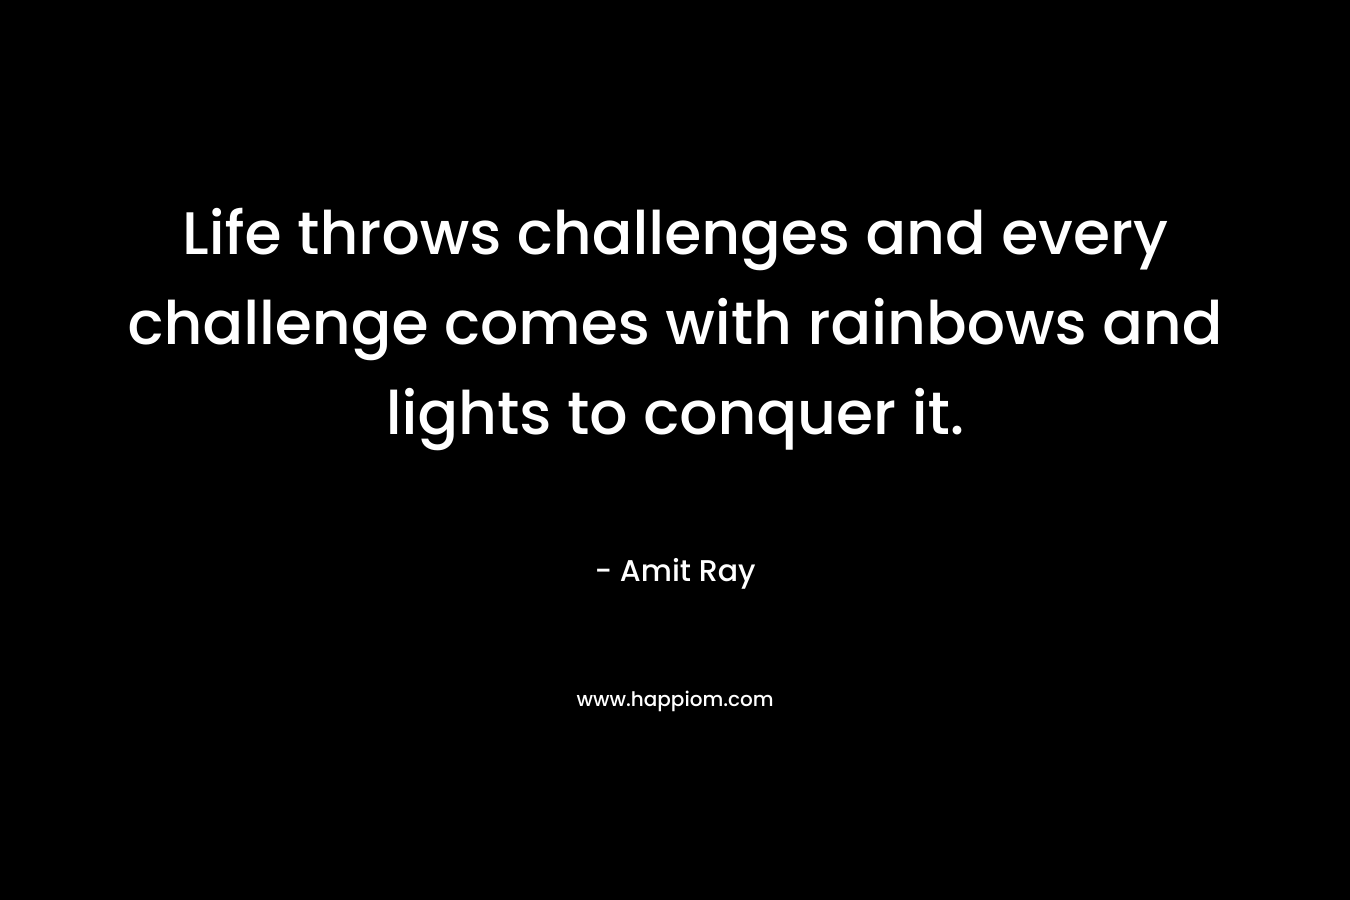 Life throws challenges and every challenge comes with rainbows and lights to conquer it.